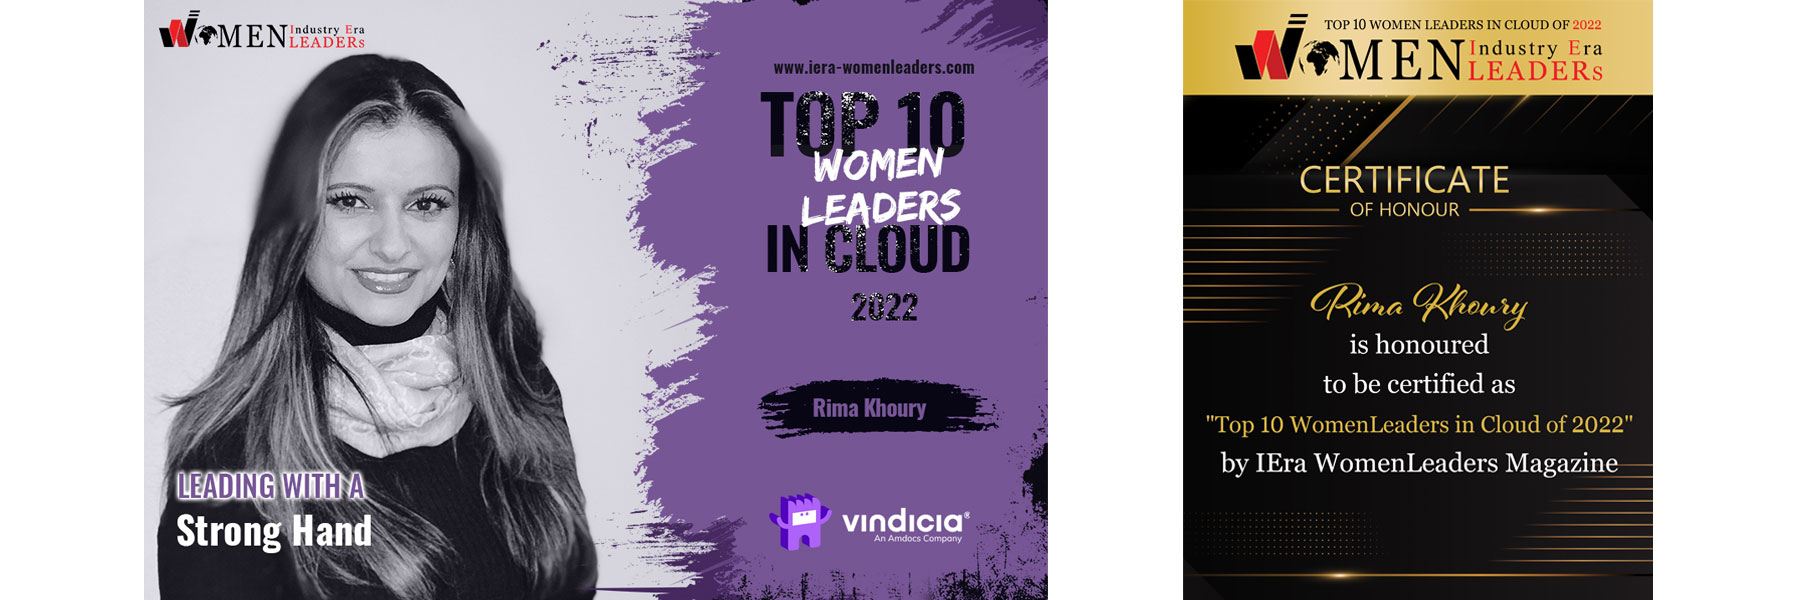 Leading with a strong hand - top 10 women leaders in cloud 2022